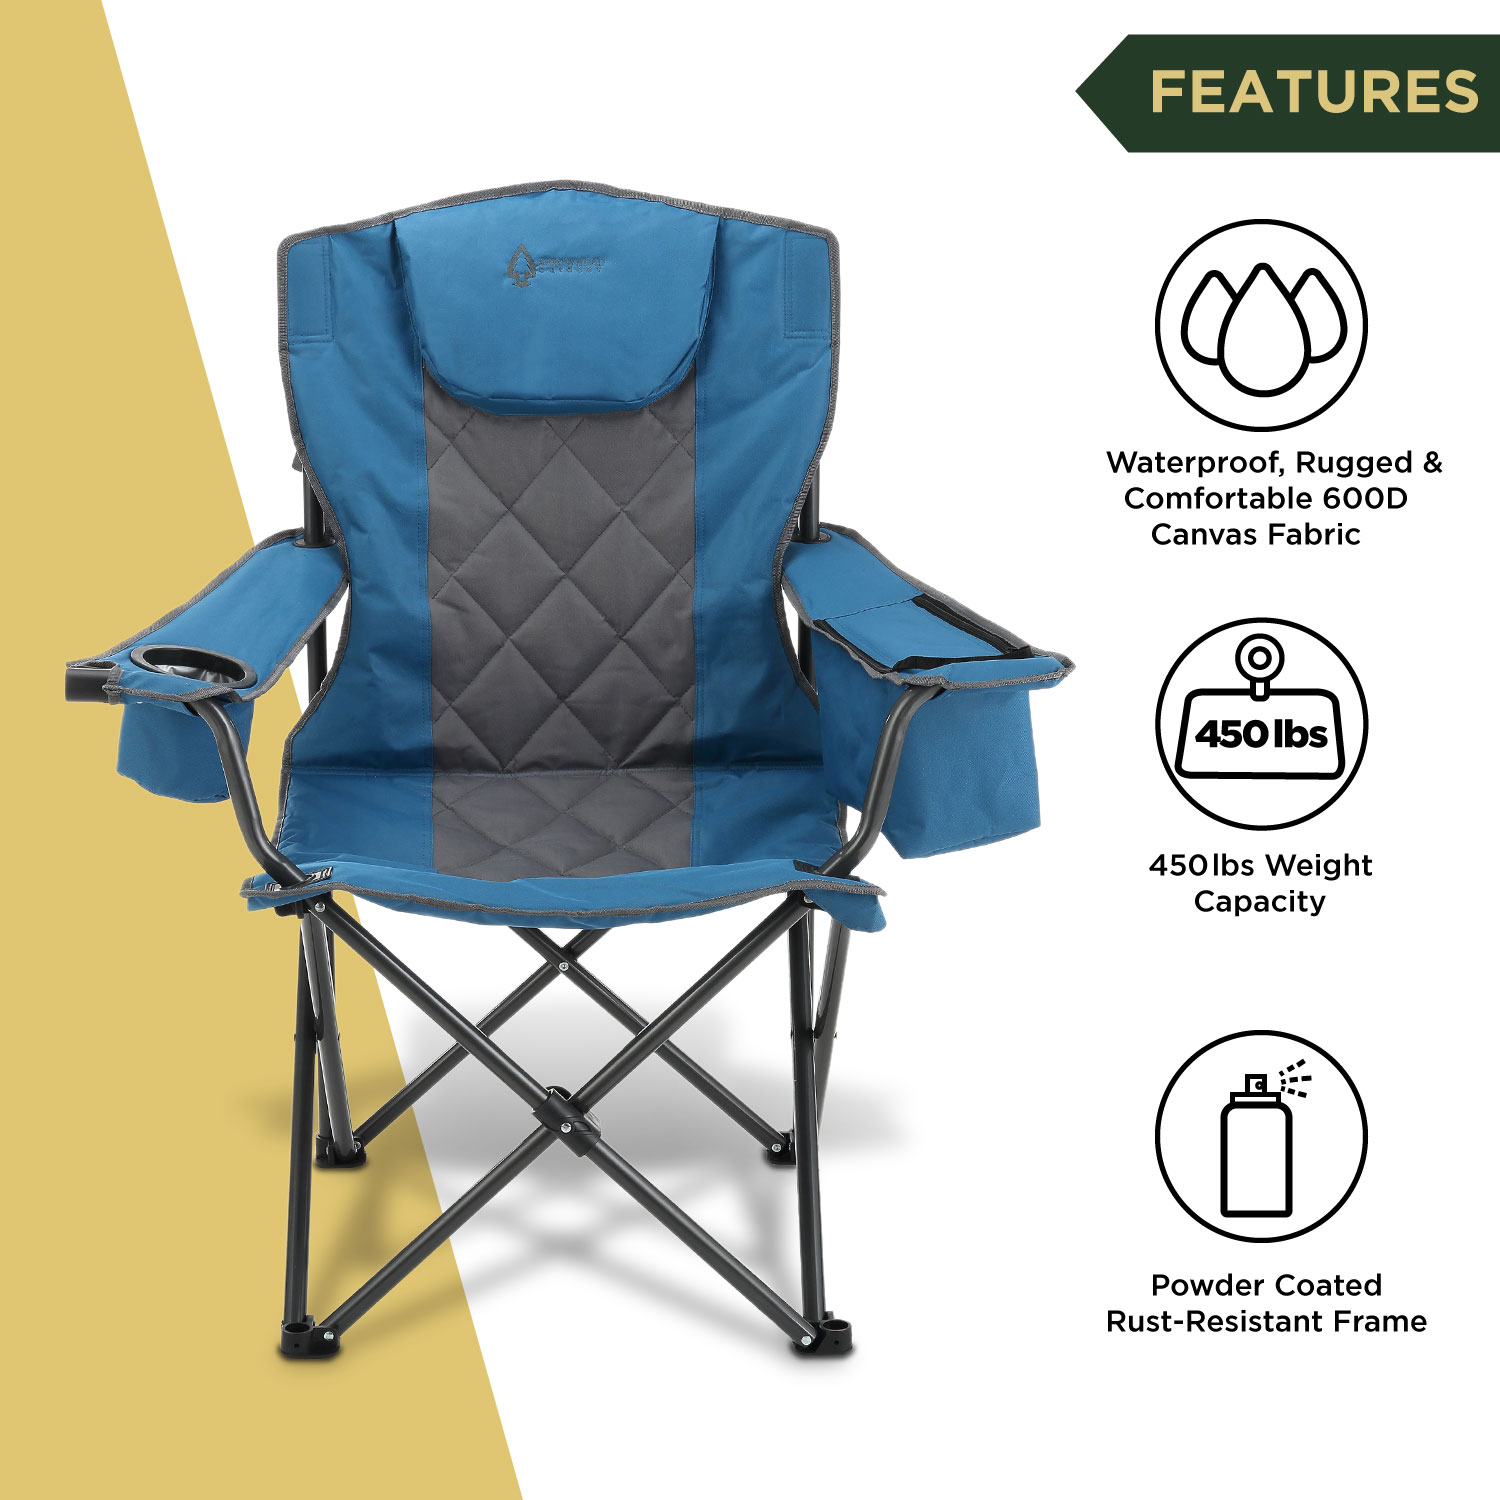 ARROWHEAD OUTDOOR Portable Folding Camping Quad Chair w/ 6-Can Cooler, Cup & Wine Glass Holders, Heavy-Duty Carrying Bag, Padded Armrests, Headrest, Supports up to 450lbs, USA-Based Support (Blue) - image 3 of 6